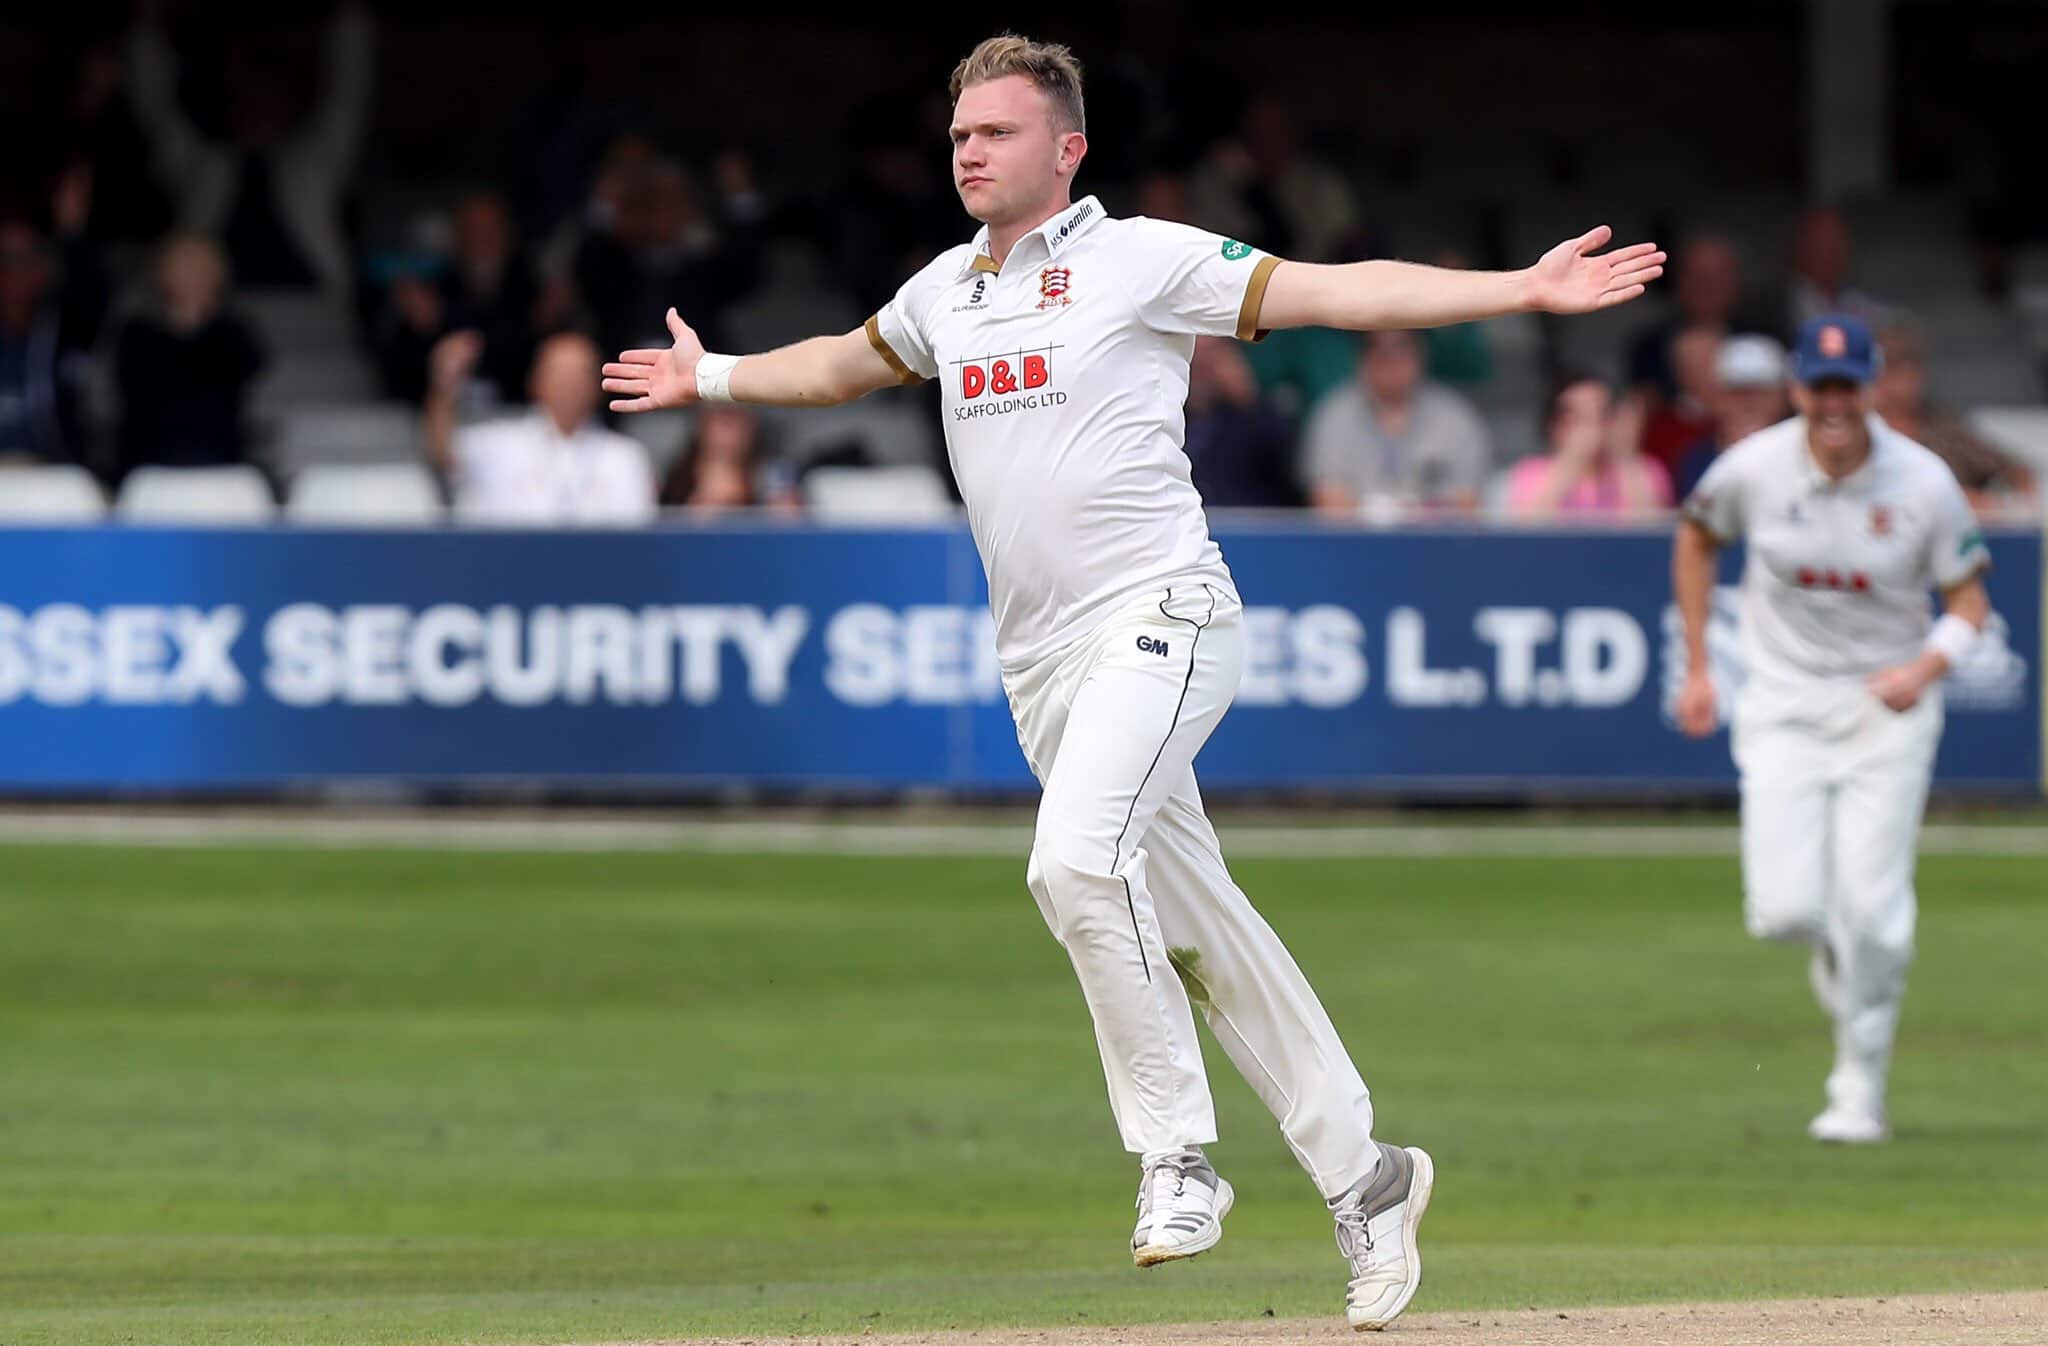 Essex's star pacer extends contract with the club